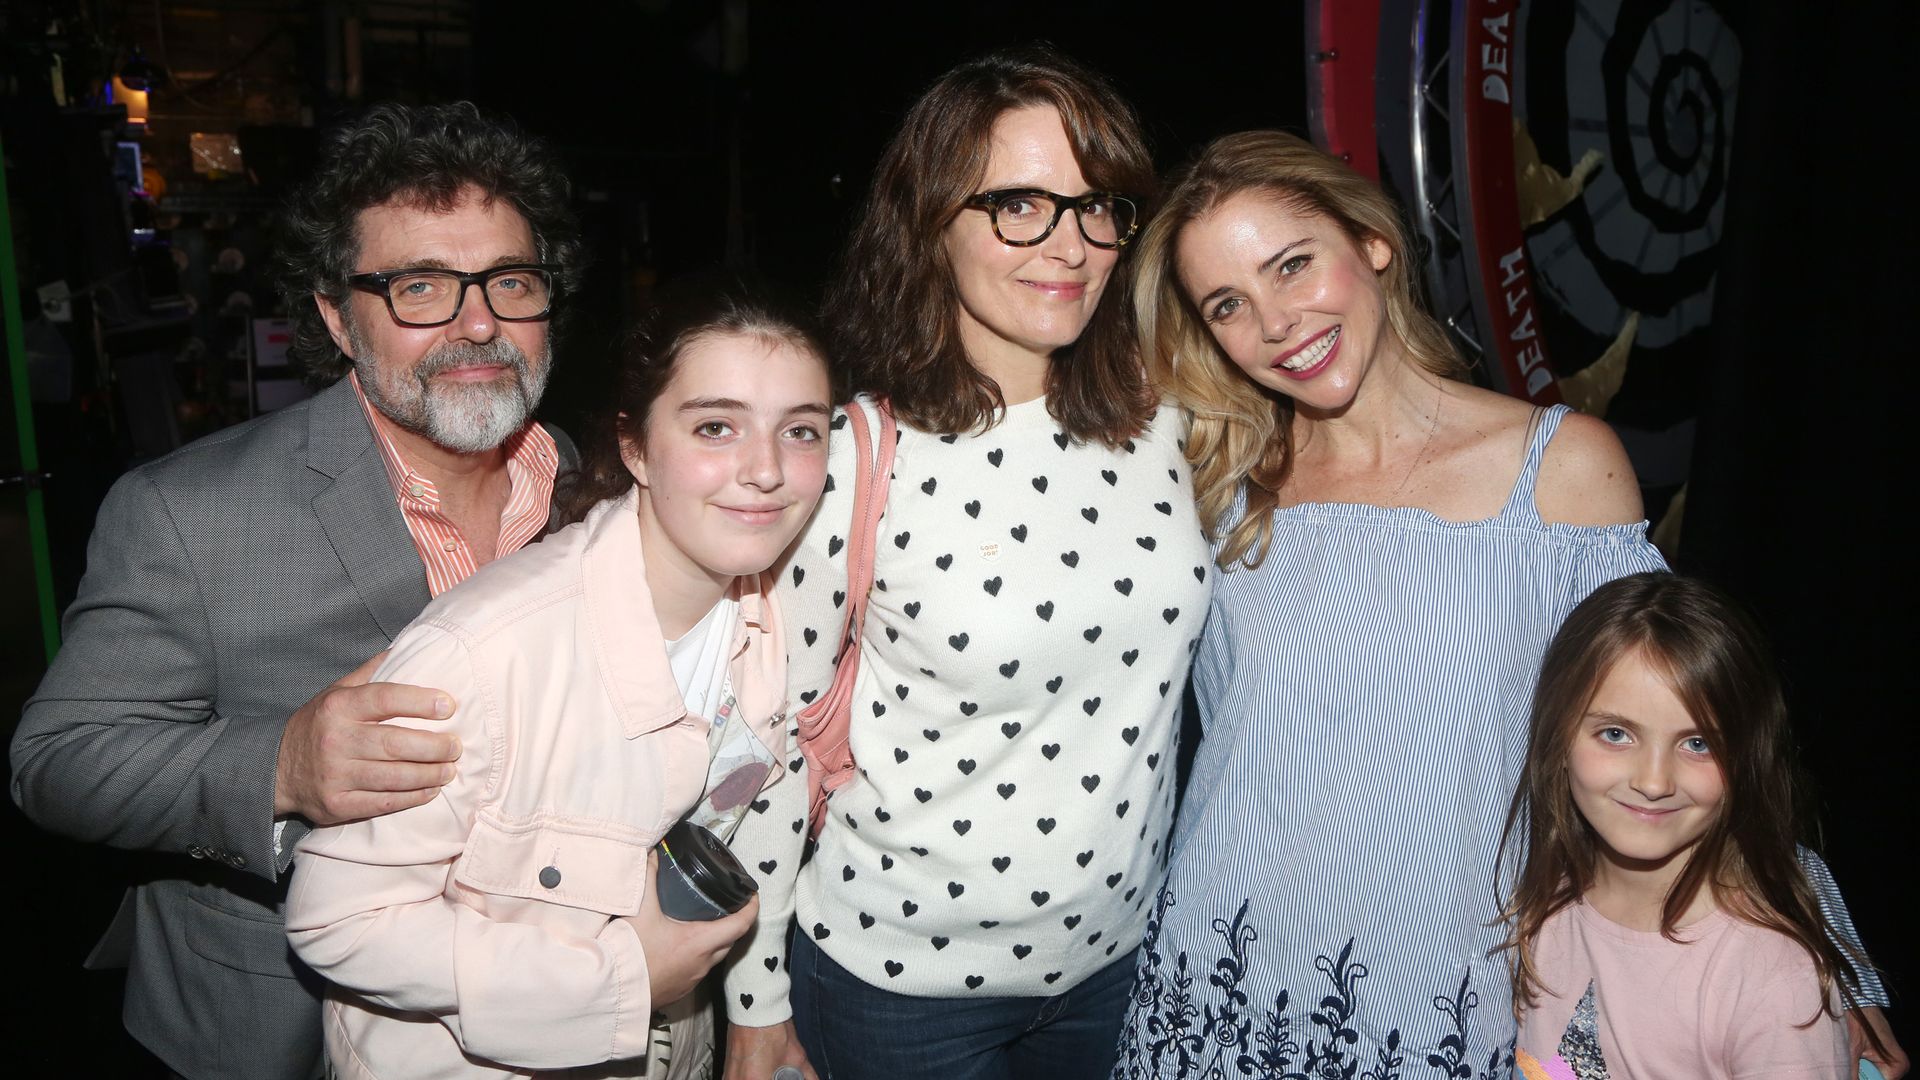 Jeff Richmond, Alice Zenobia Richmond, Tina Fey, Kerry Butler and Penelope Athena Richmond pose backstage at the hit musical based on the film "Beetlejuice" on Broadway at The Winter Garden Theatre on June 8, 2019 in New York City.